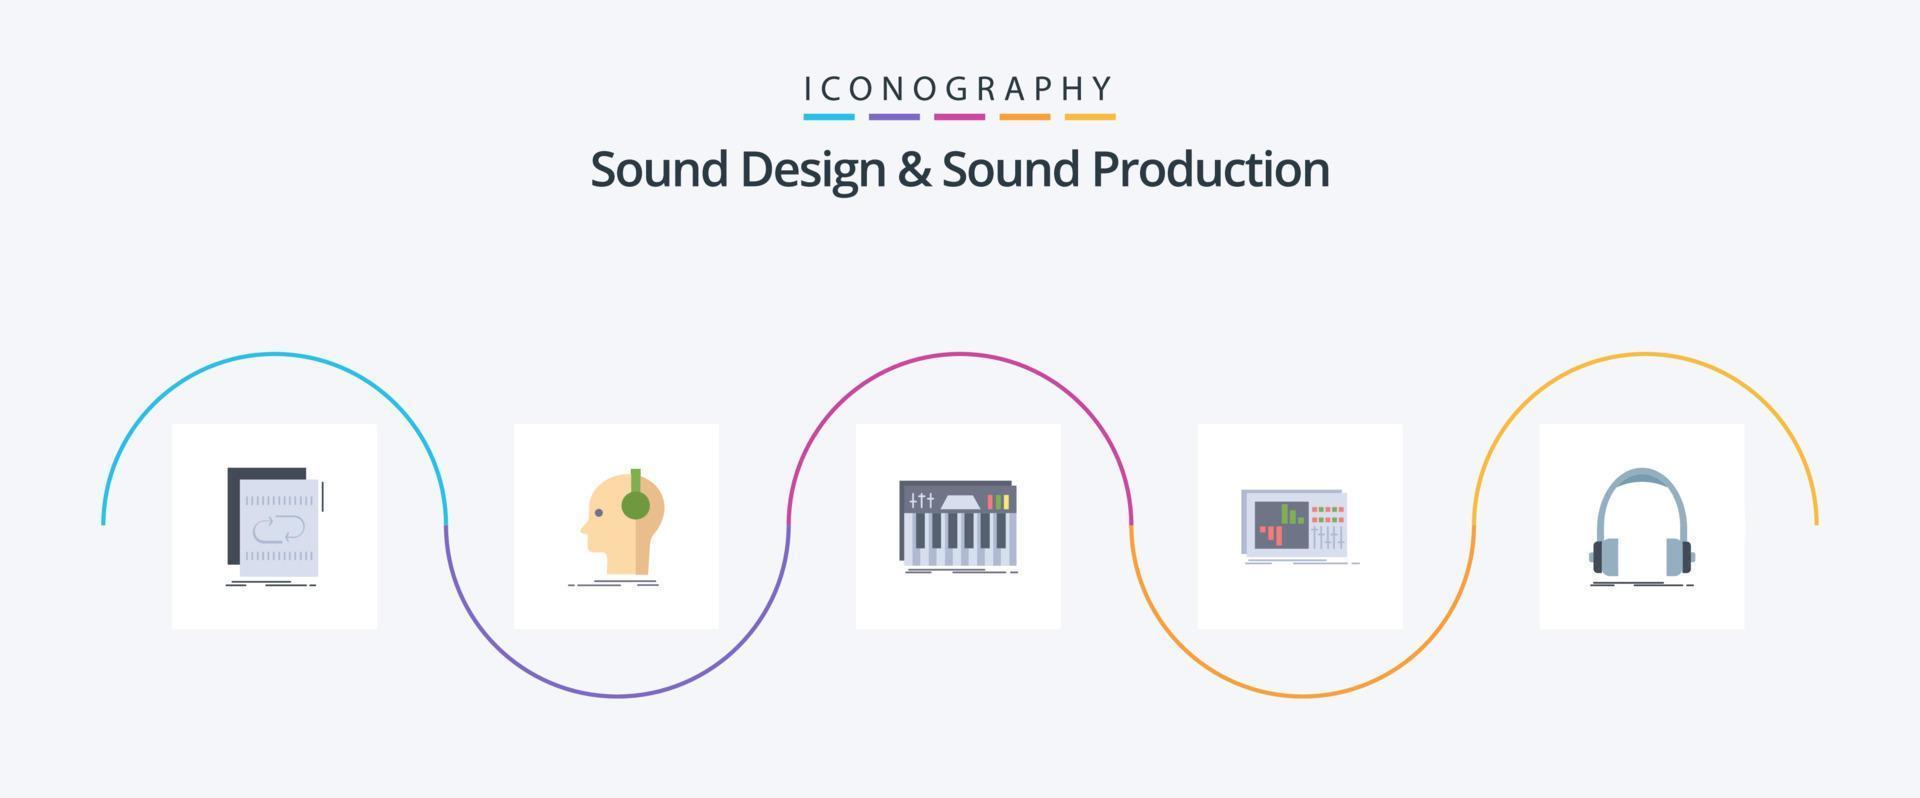 Sound Design And Sound Production Flat 5 Icon Pack Including equalization. control. producer. sound. keys vector